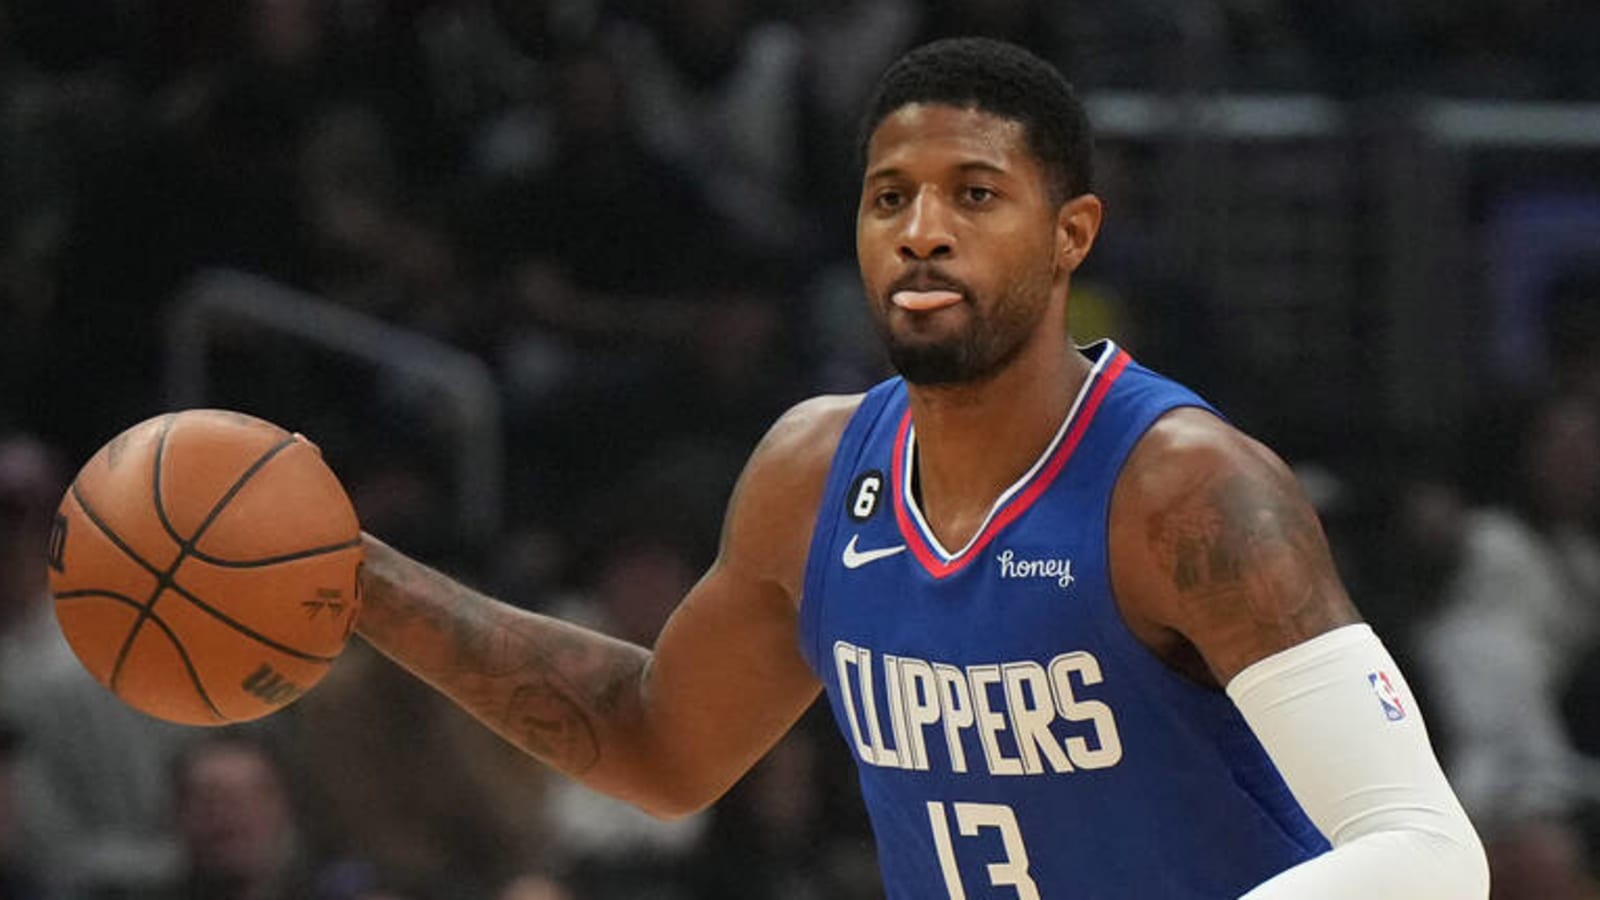 This Clippers star is ready to put the NBA on notice